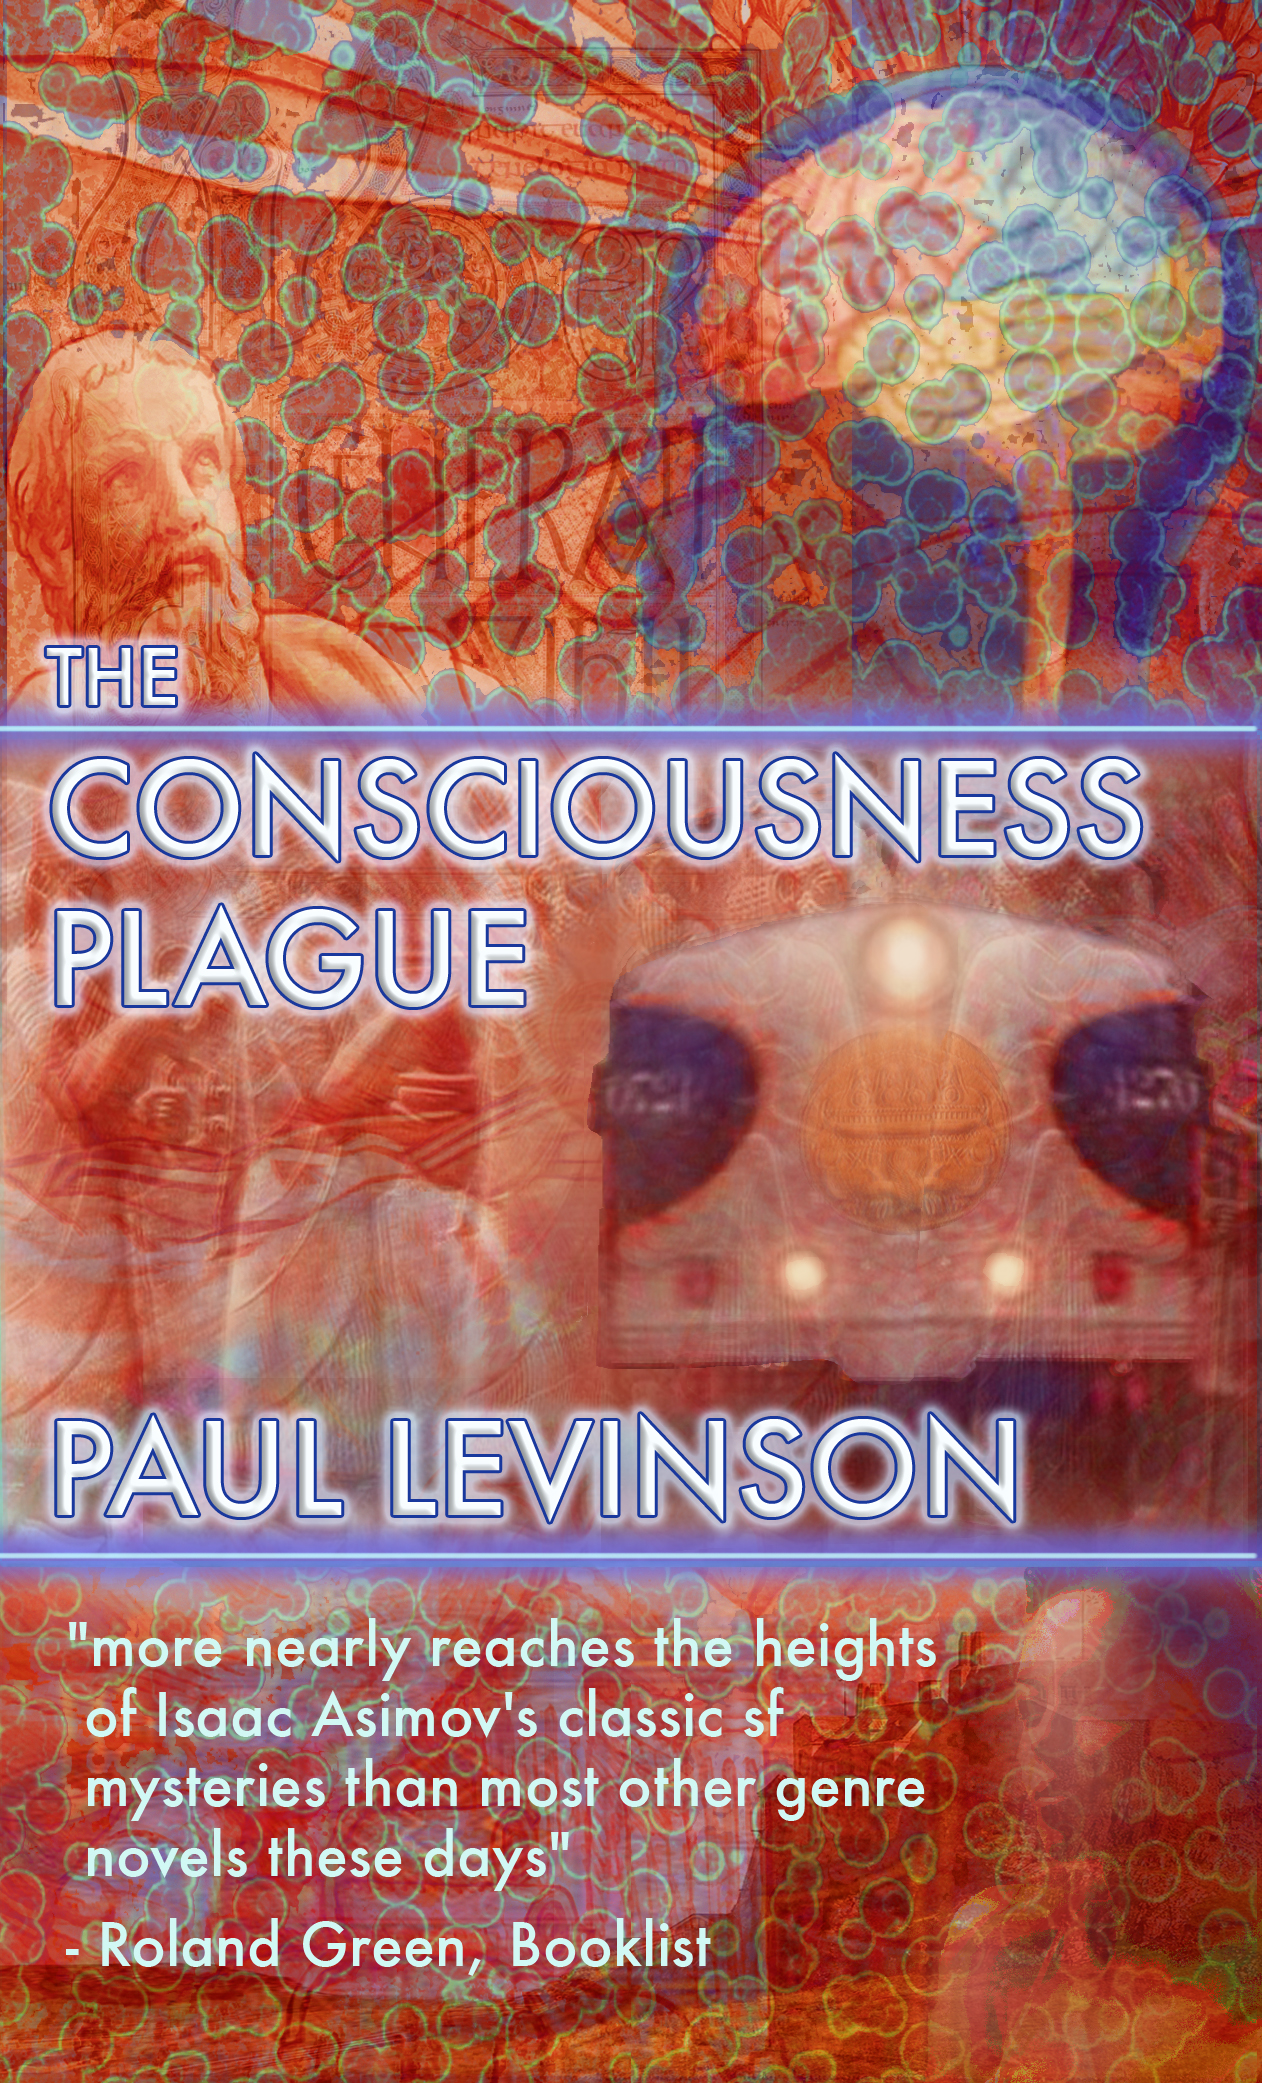 cover The Consciousness Plague, author's cut ebook, 2013; hardcover published in 2002